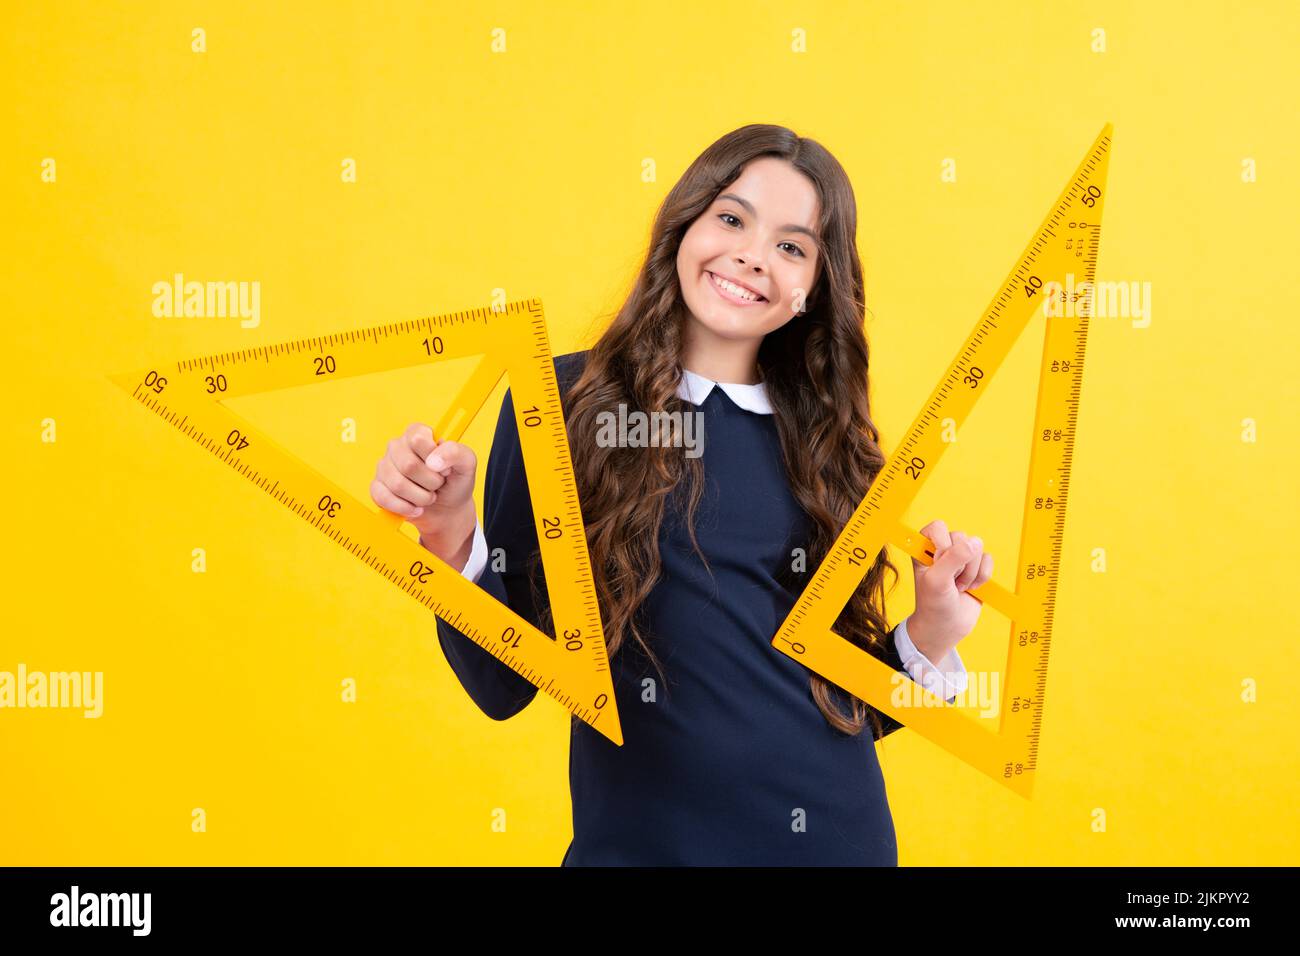 RULLER FOR MATHEMATICS AND GEOMETRY IN SCHOOL Stock Photo - Alamy